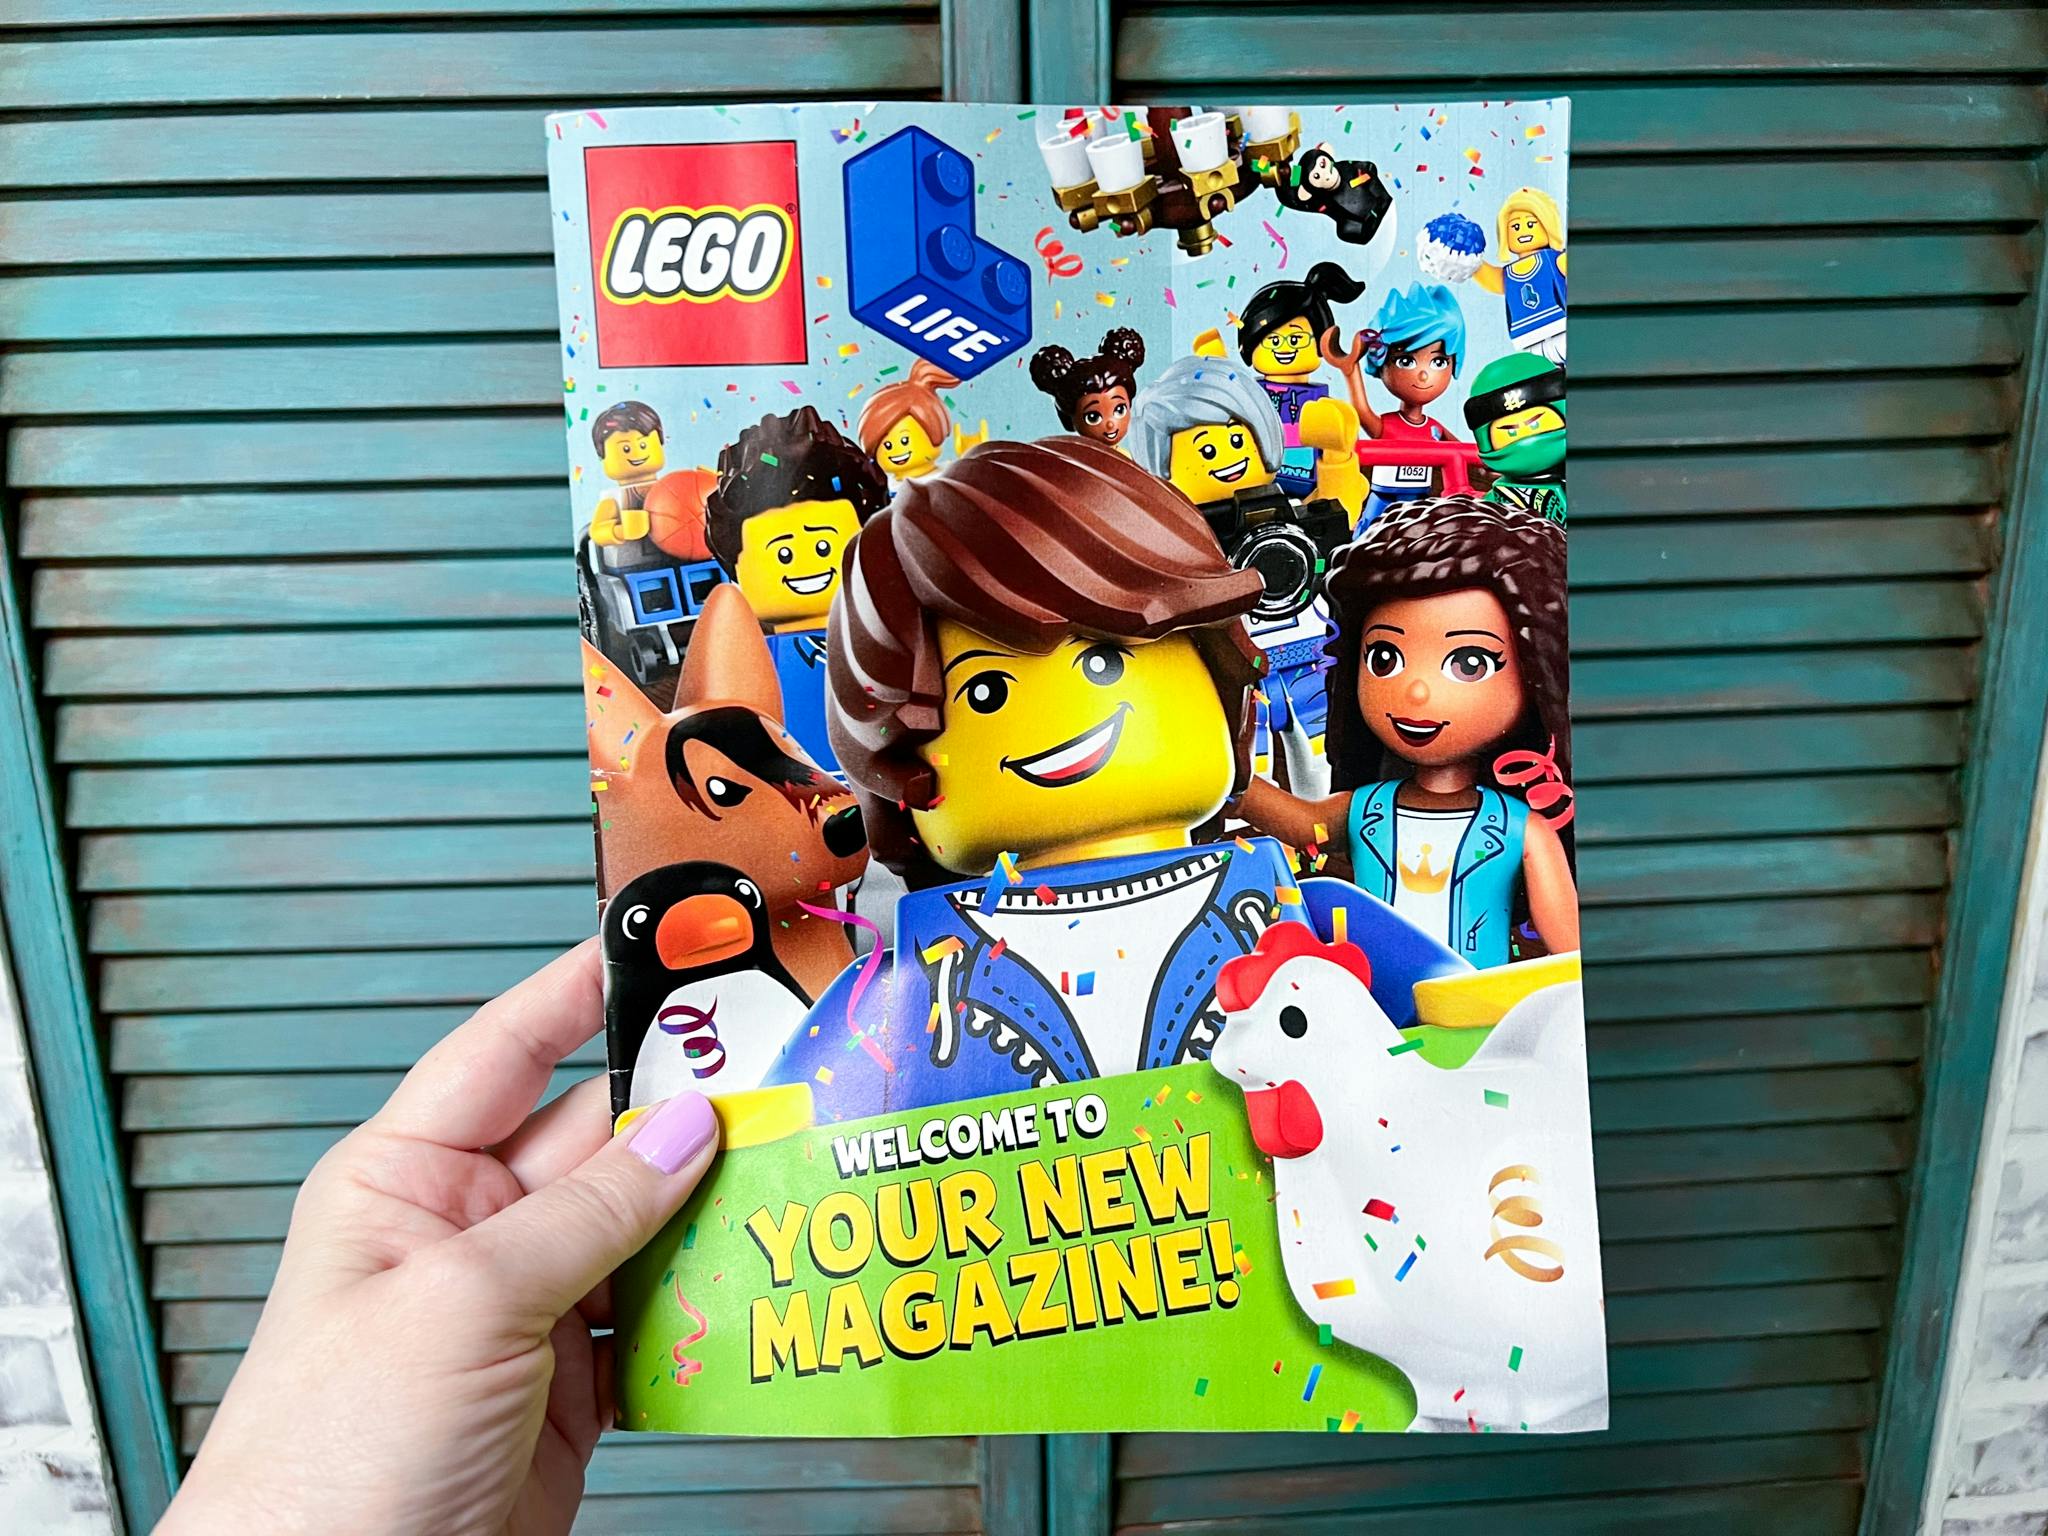 How to Get the Free Lego Life Magazine - The Krazy